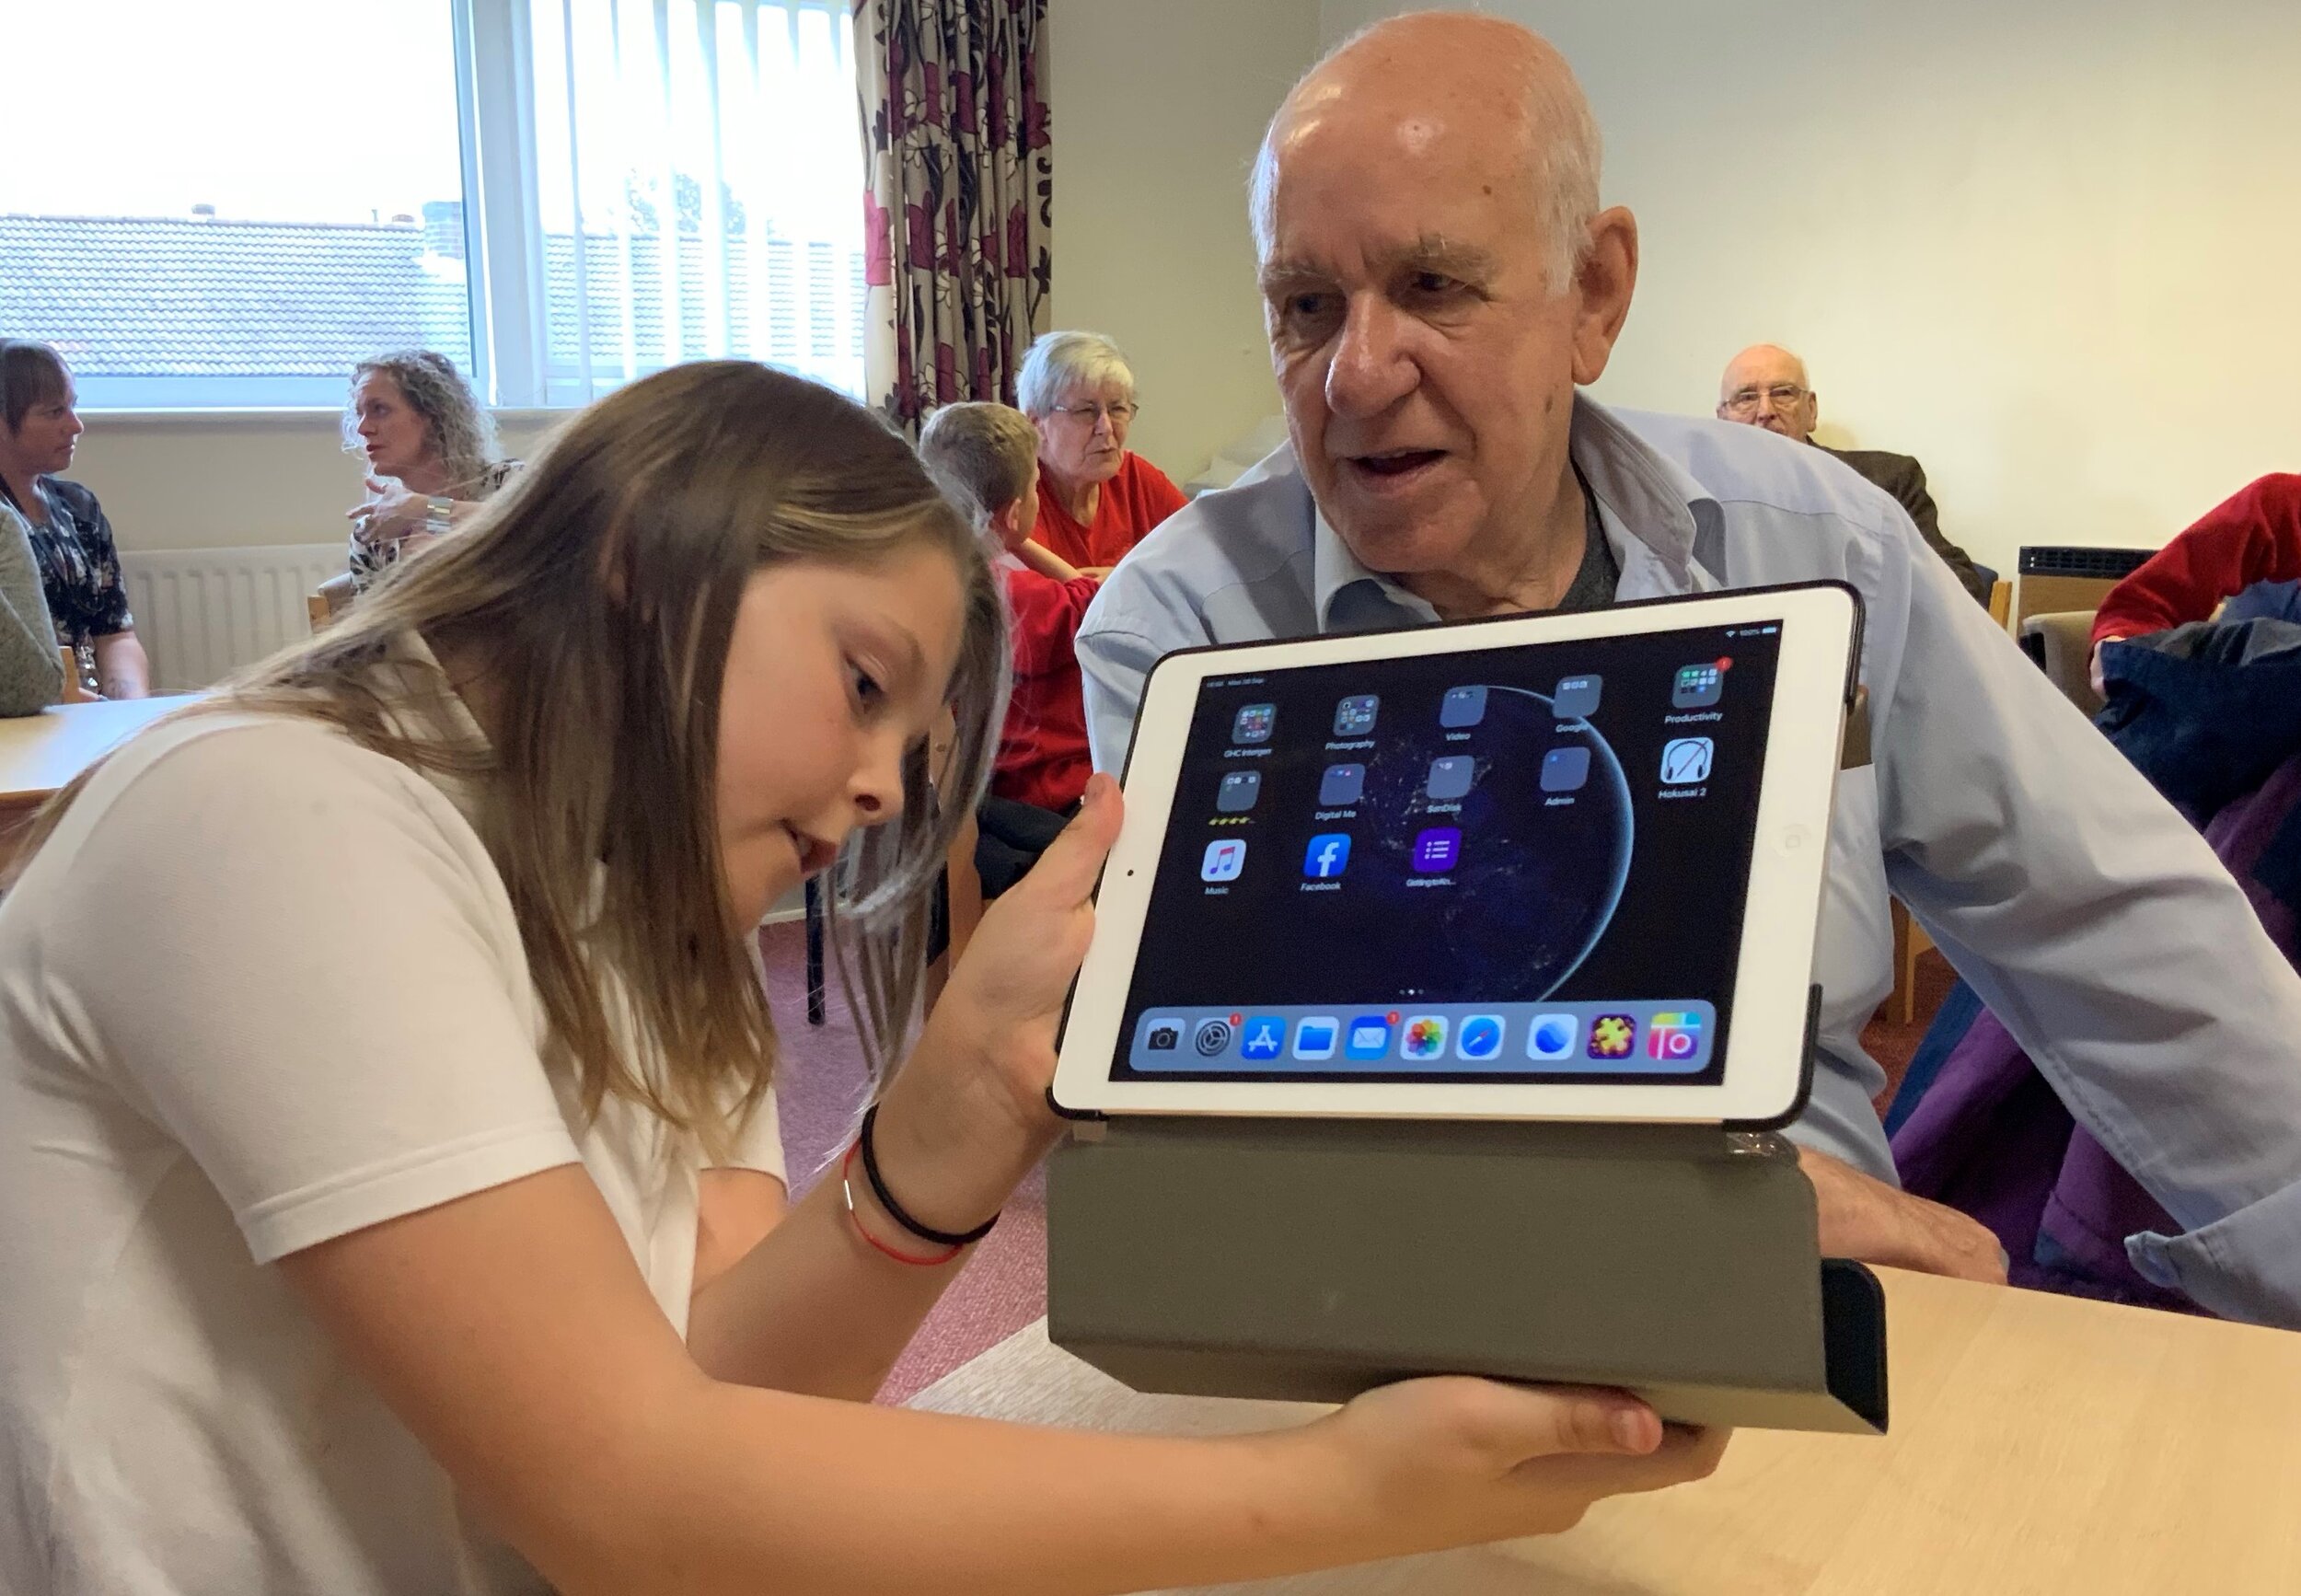 School girl showing an older man how to use the case on the ipad